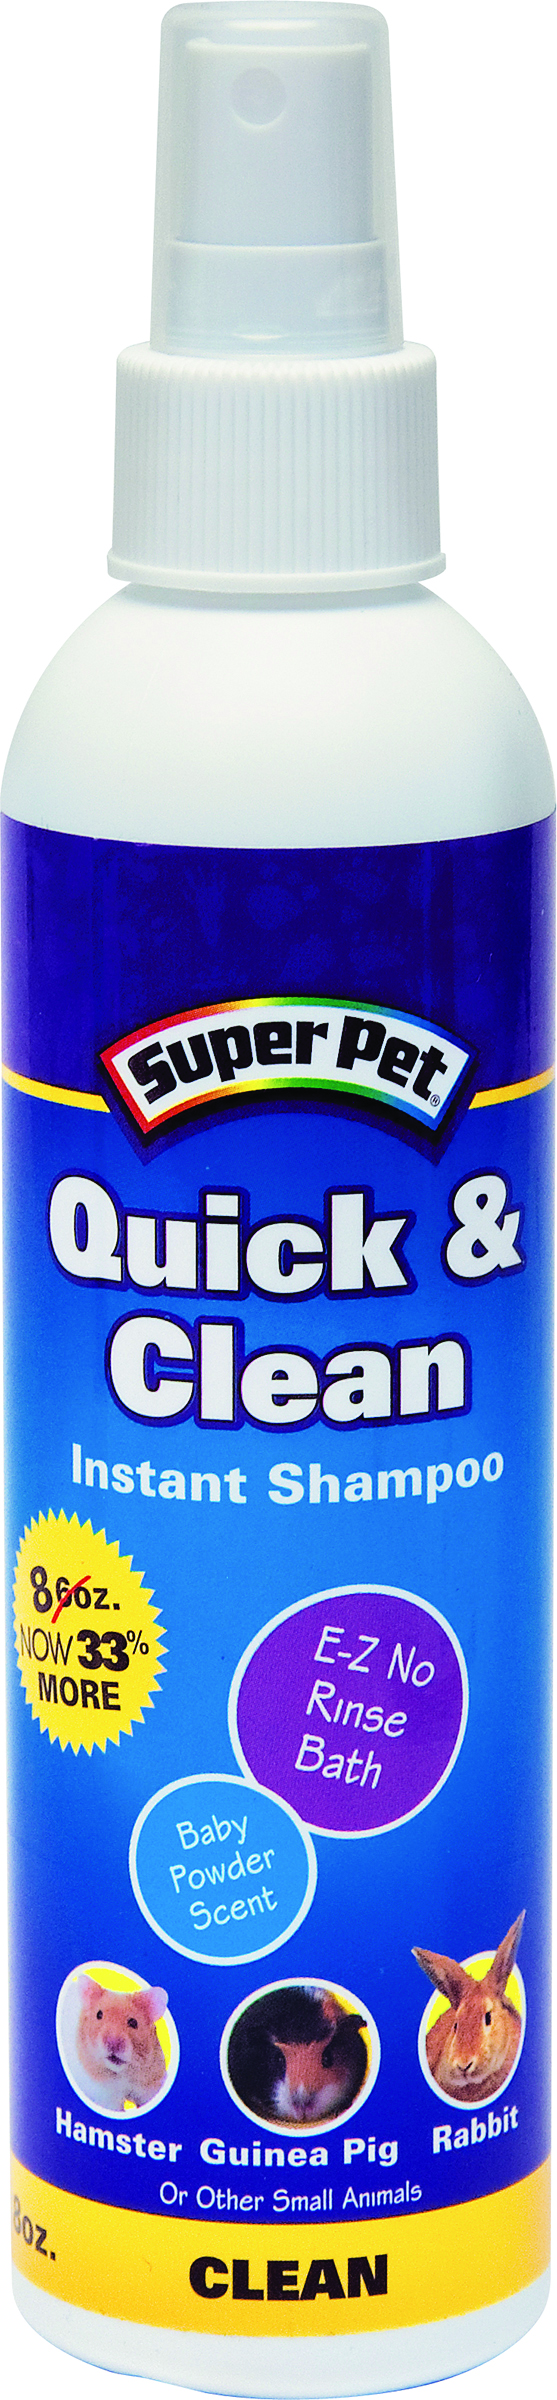 Quick & Clean Instant Shampoo, Critter